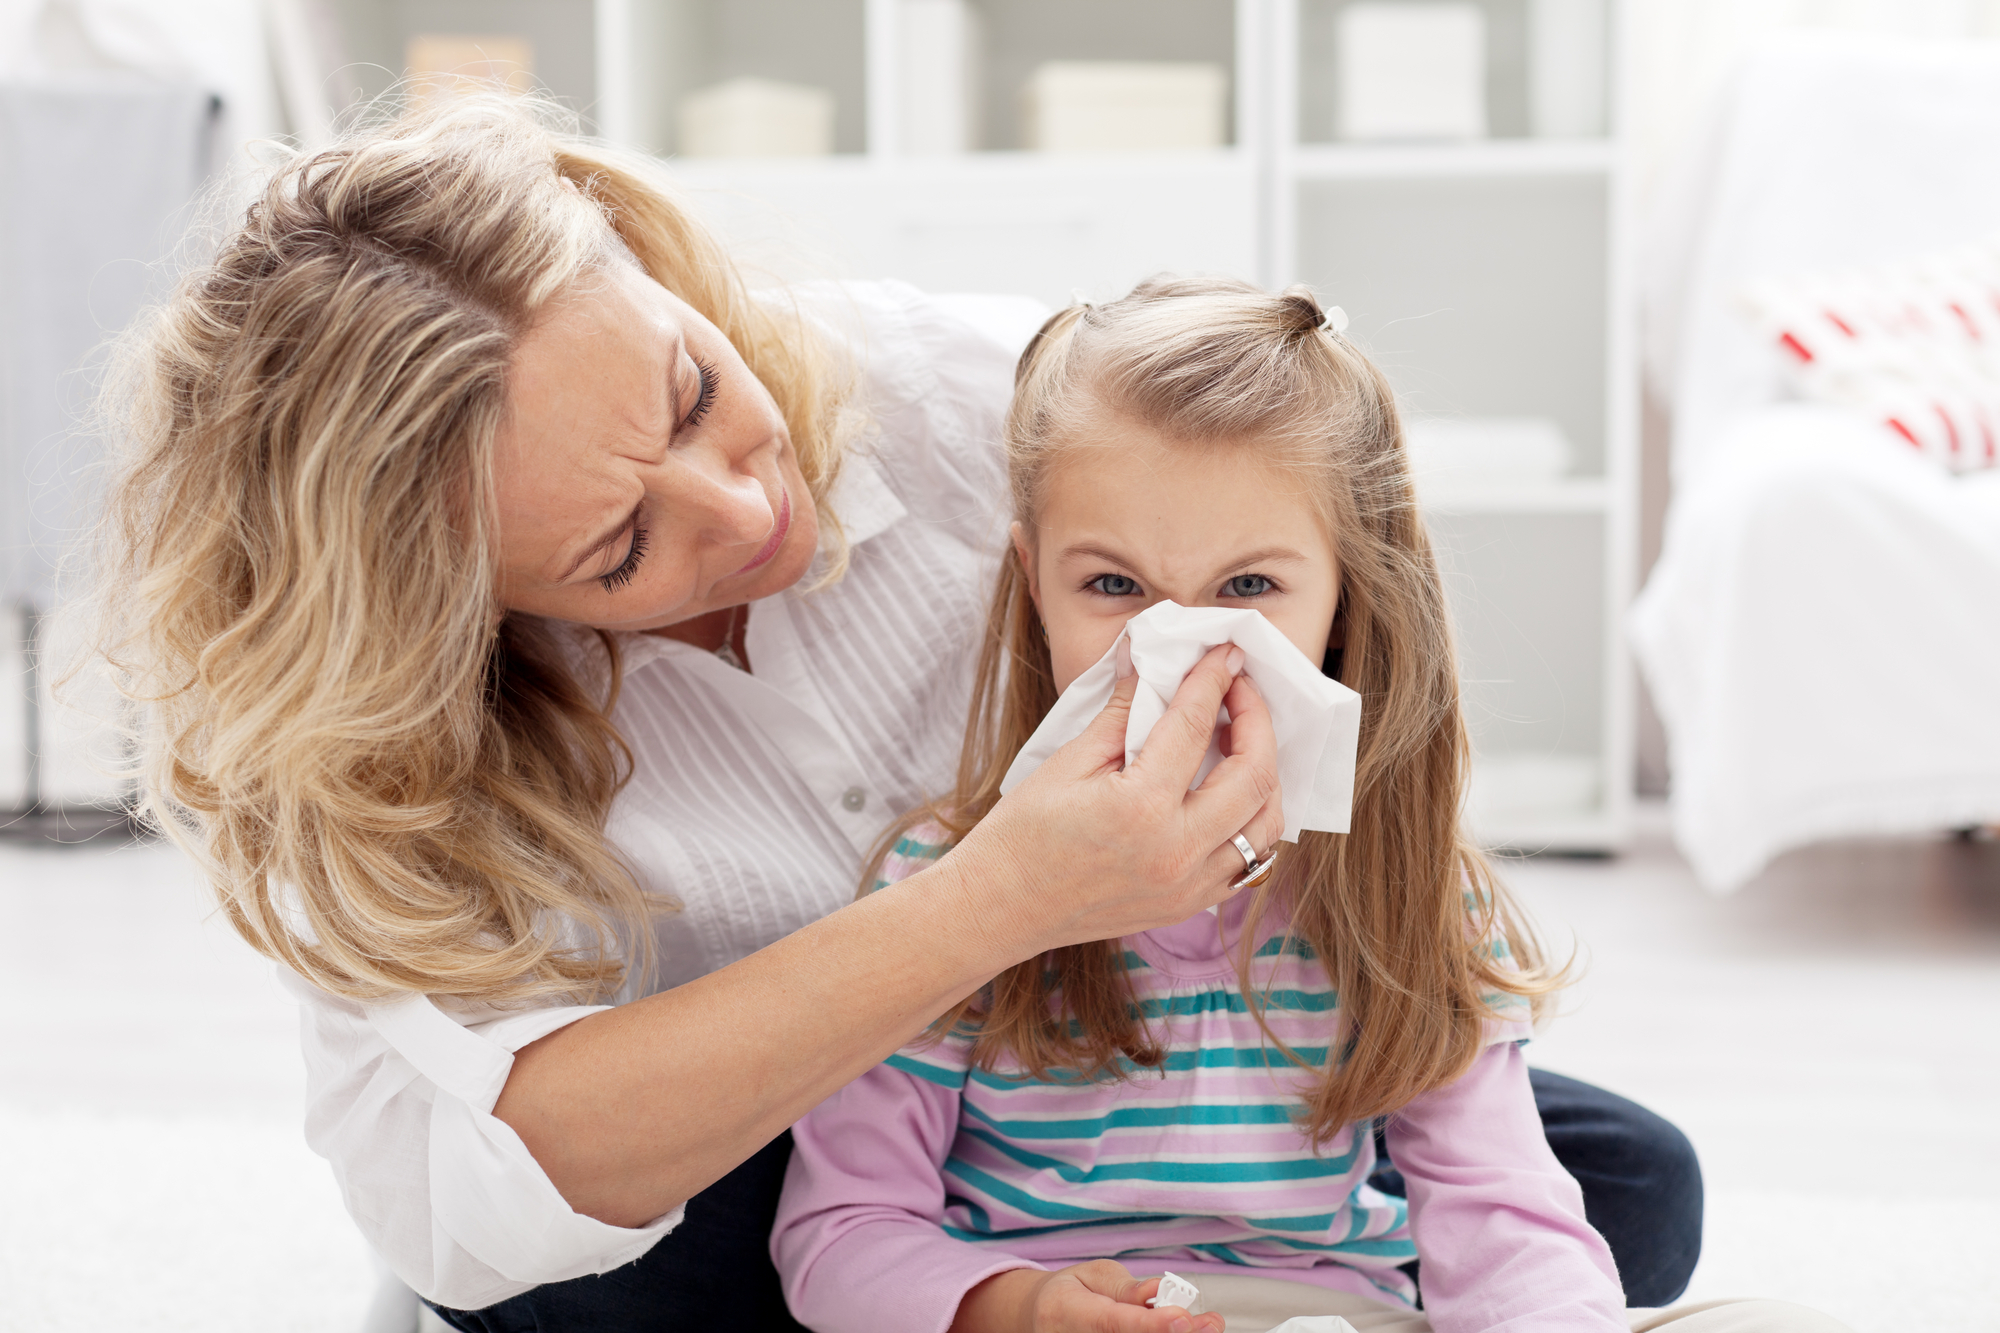 A woman helping a young girl blow her nose with a tissue